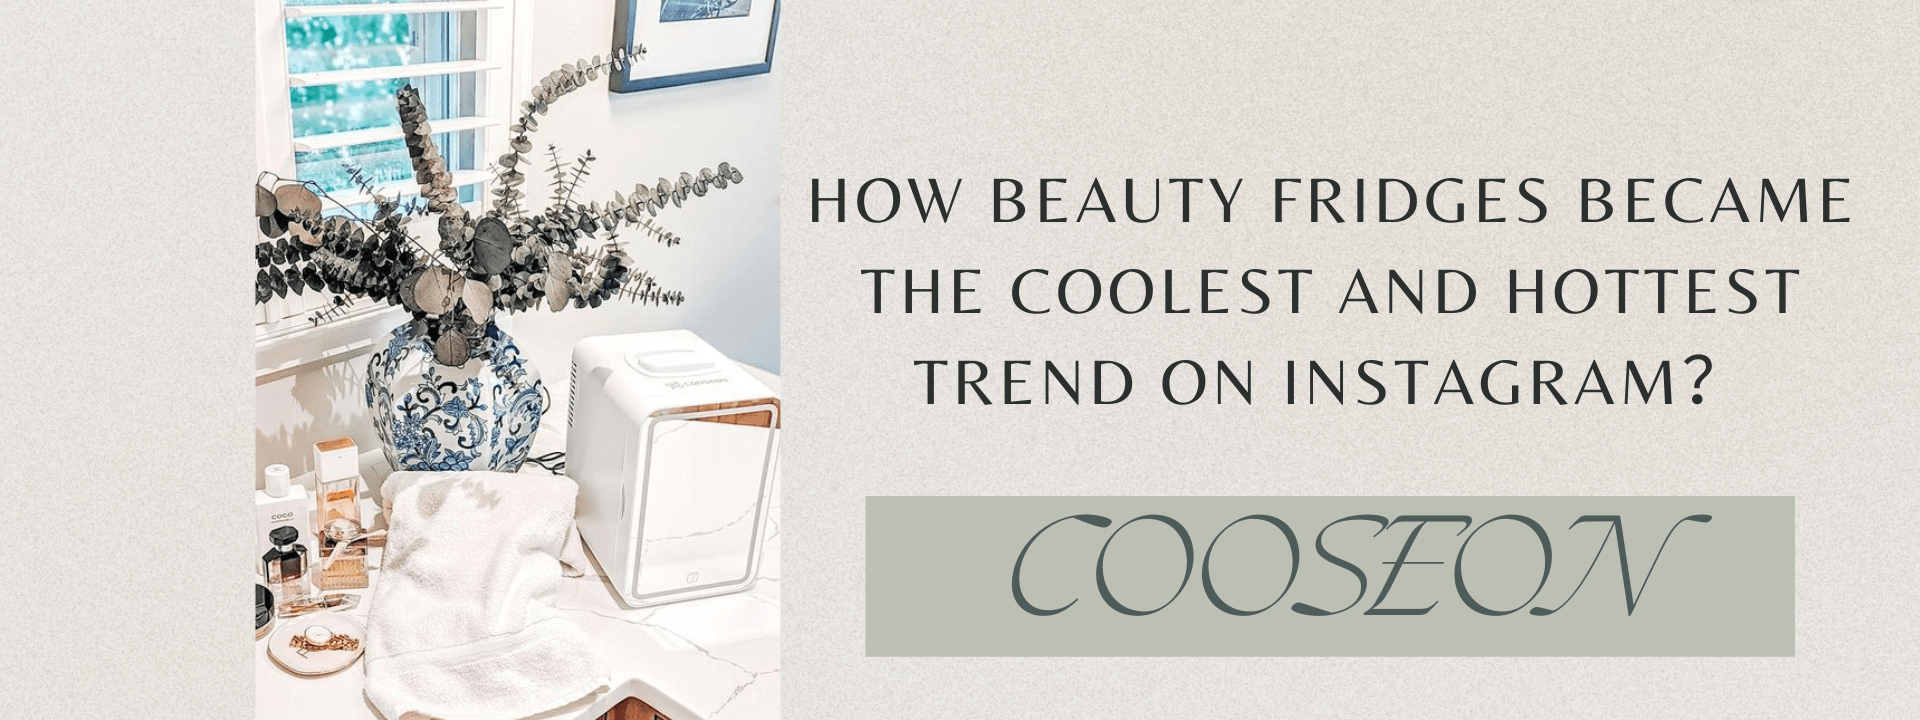 How Beauty Fridges Became the Coolest and Hottest Trend on Instagram - 1st Mini Skincare Fridges With LED Mirror | COOSEON®